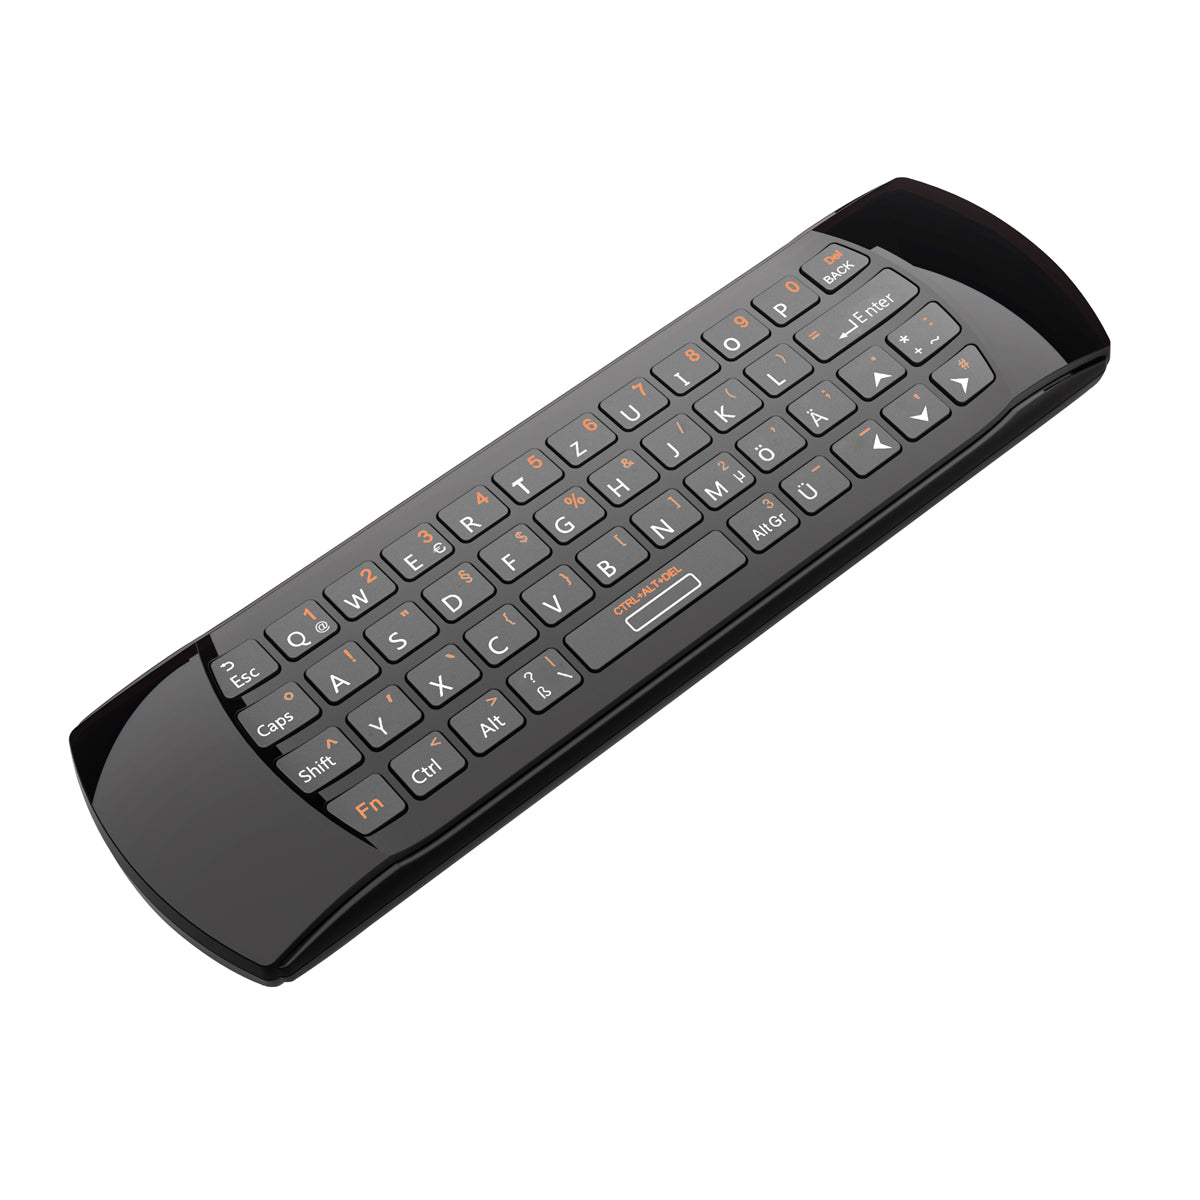 Orbsmart AM-1 wireless air mouse with German keyboard and IR learning function